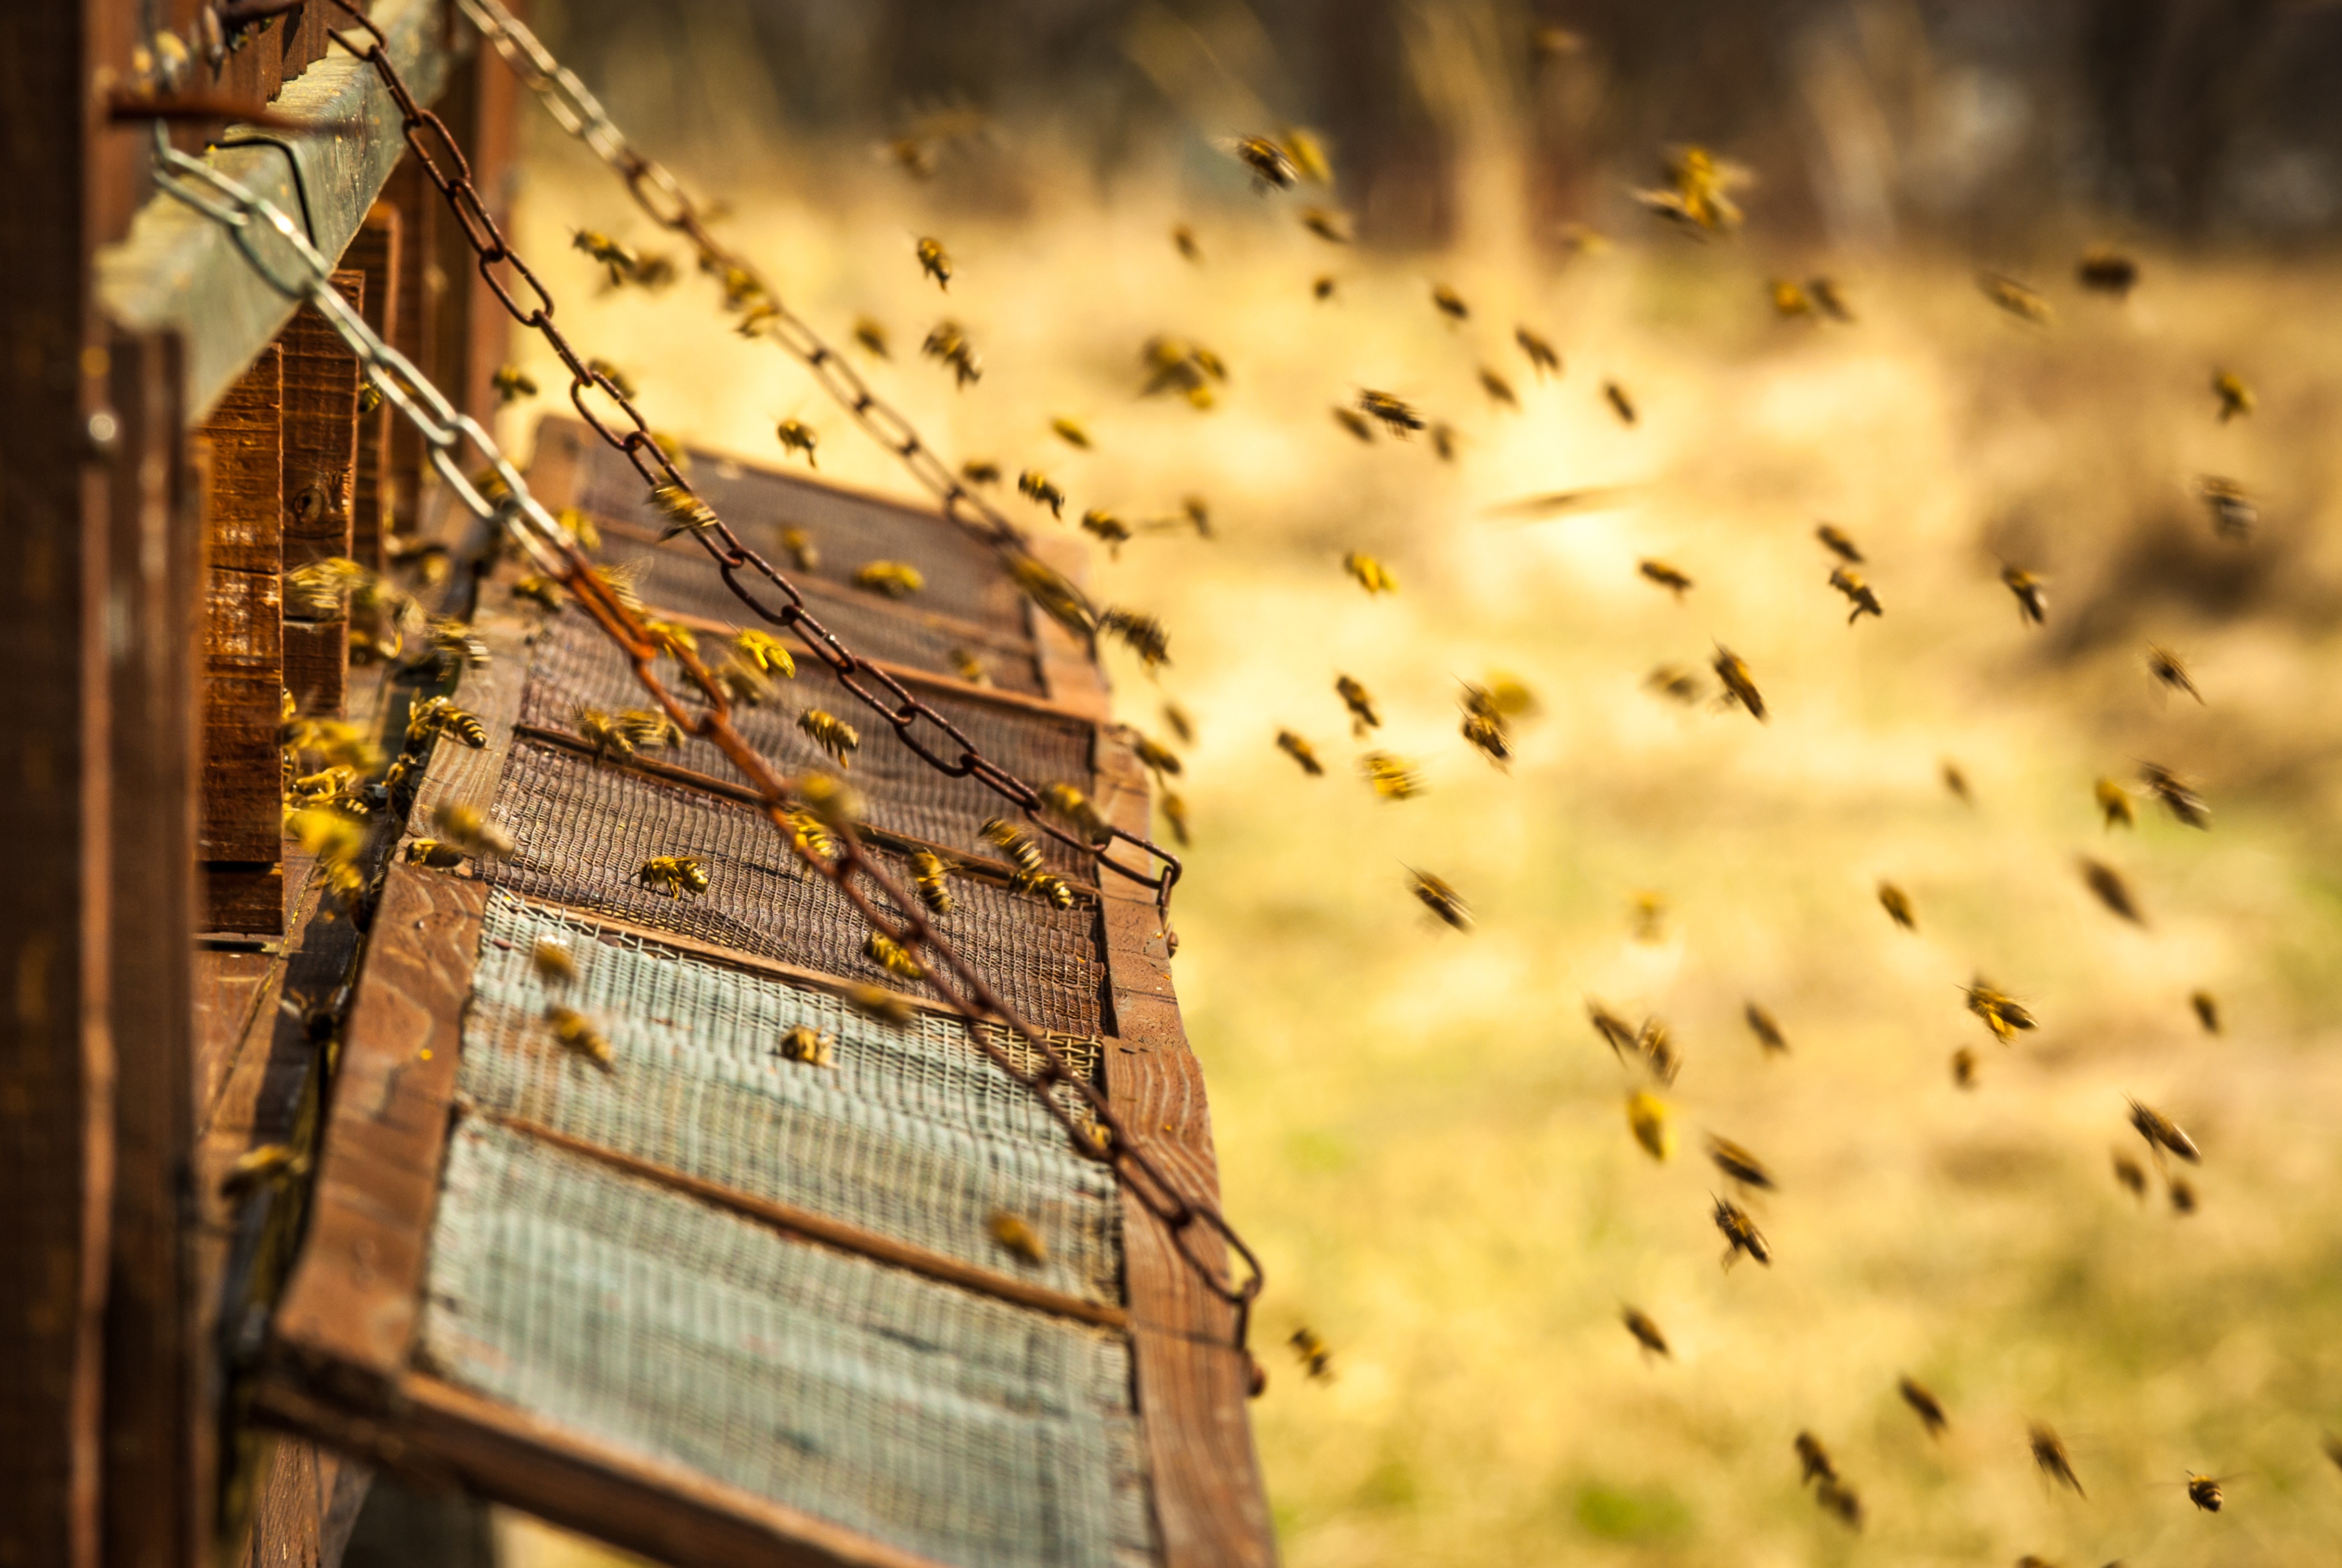 Web2Print: A Hive for the Busiest of Bees